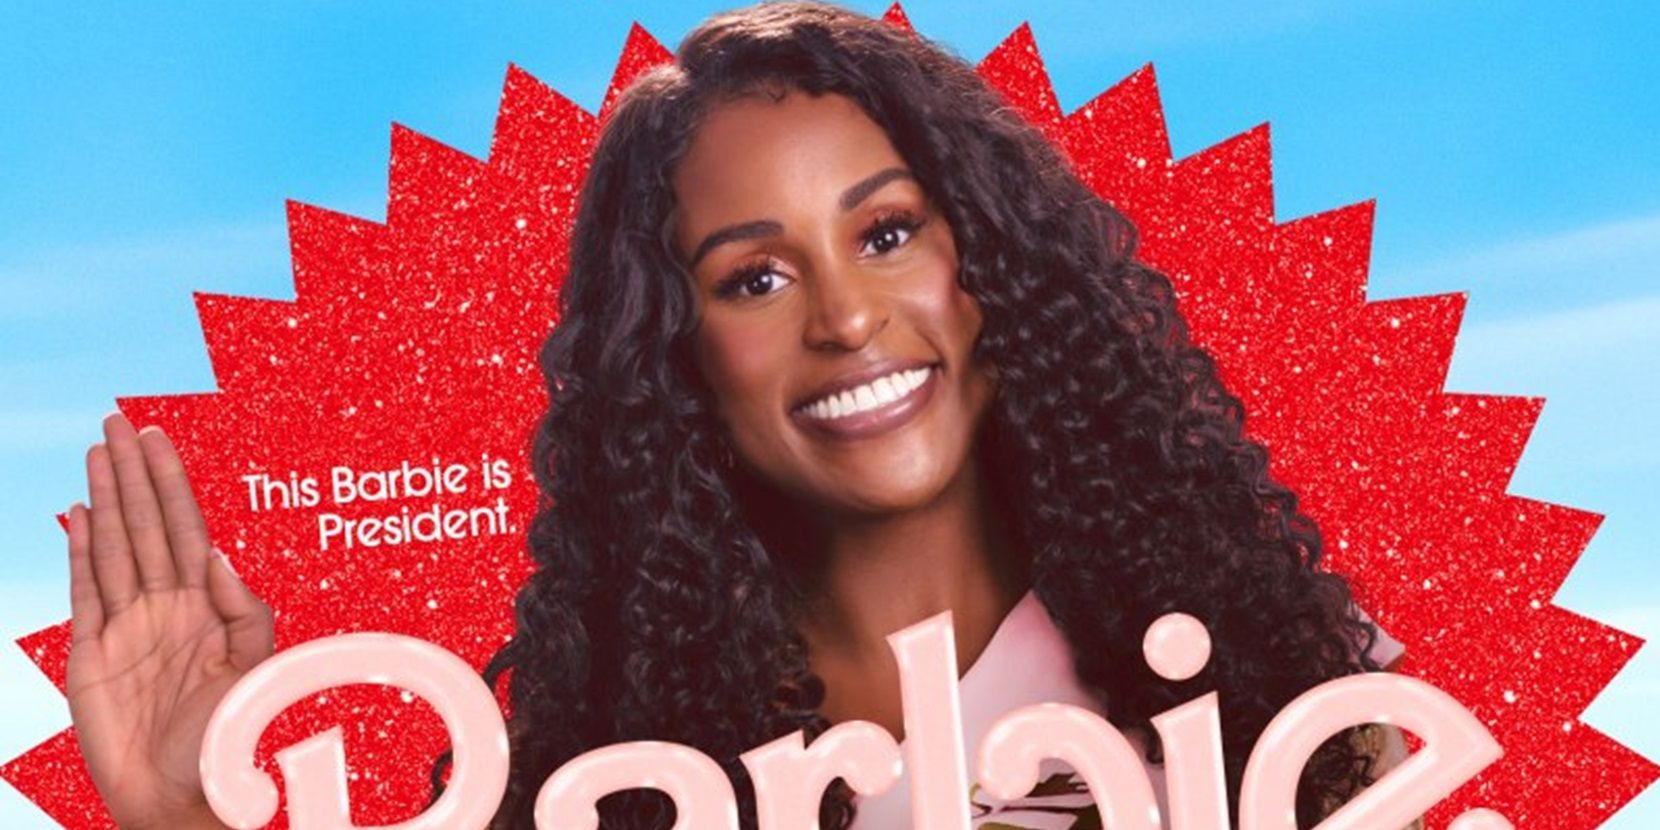 Issa Rae plays President Barbie in the Barbie cast